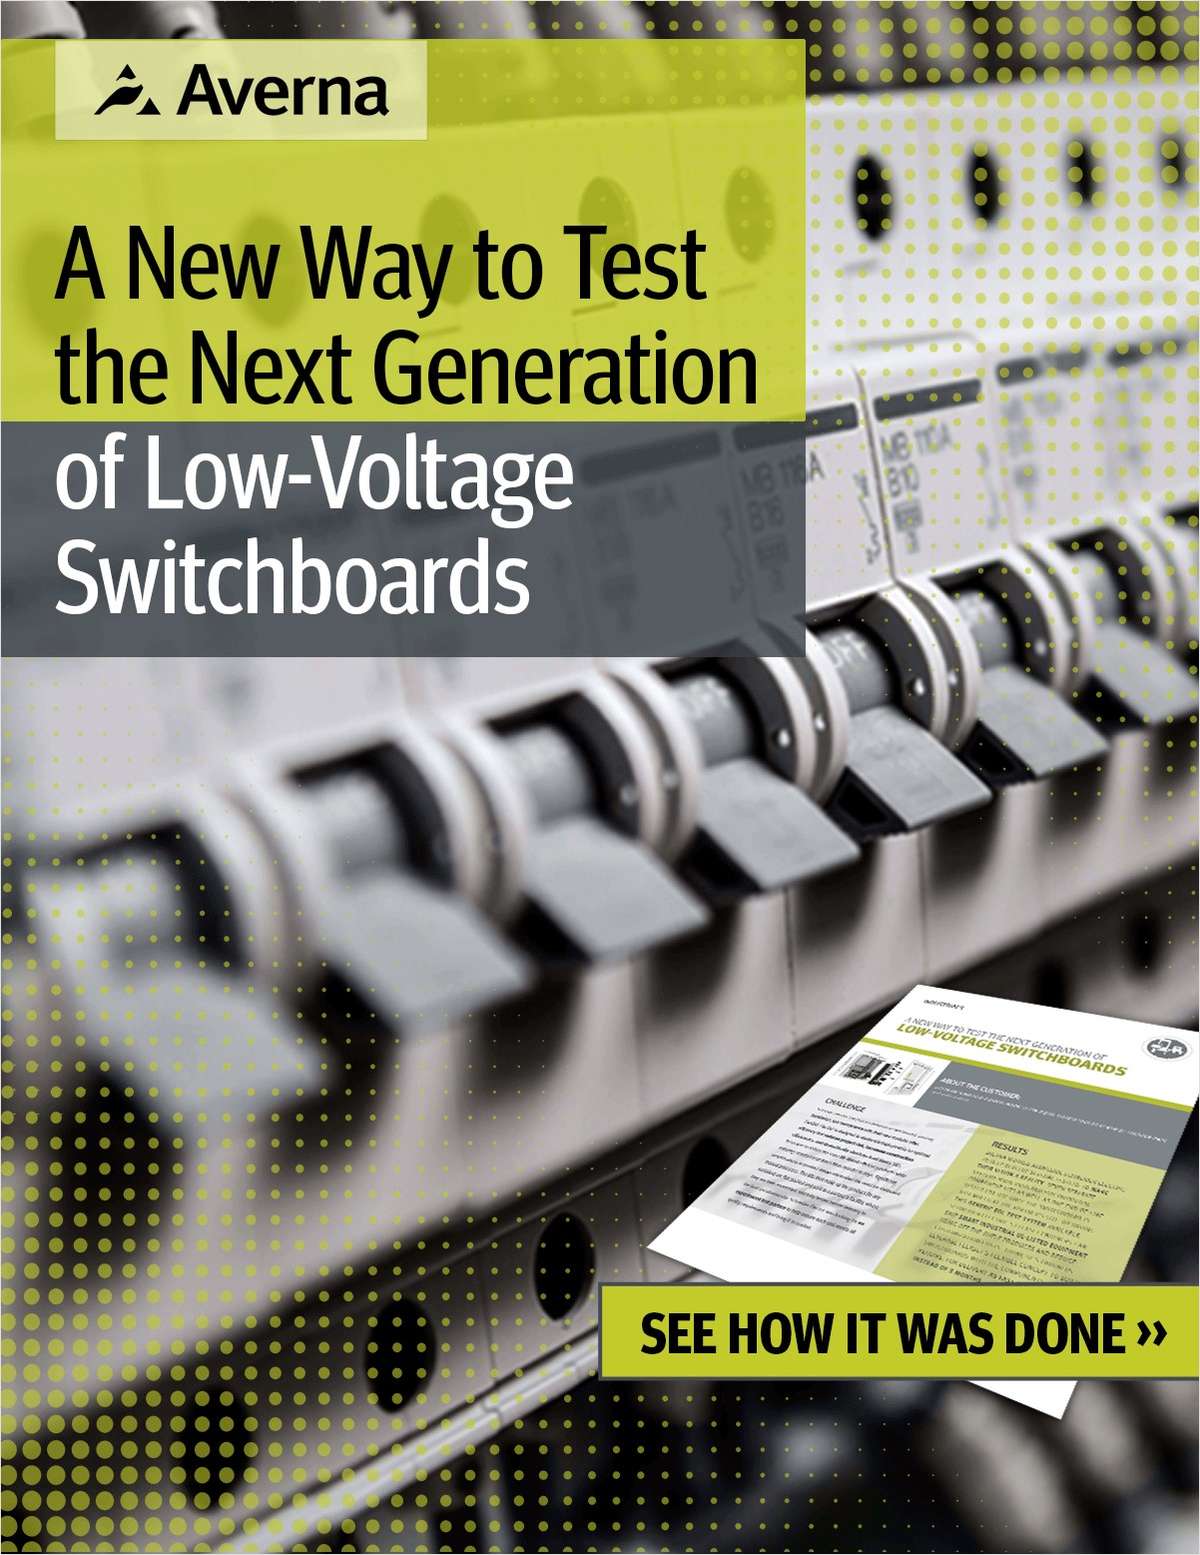 A New Way to Test the Next Generation of Low-Voltage Switchboards